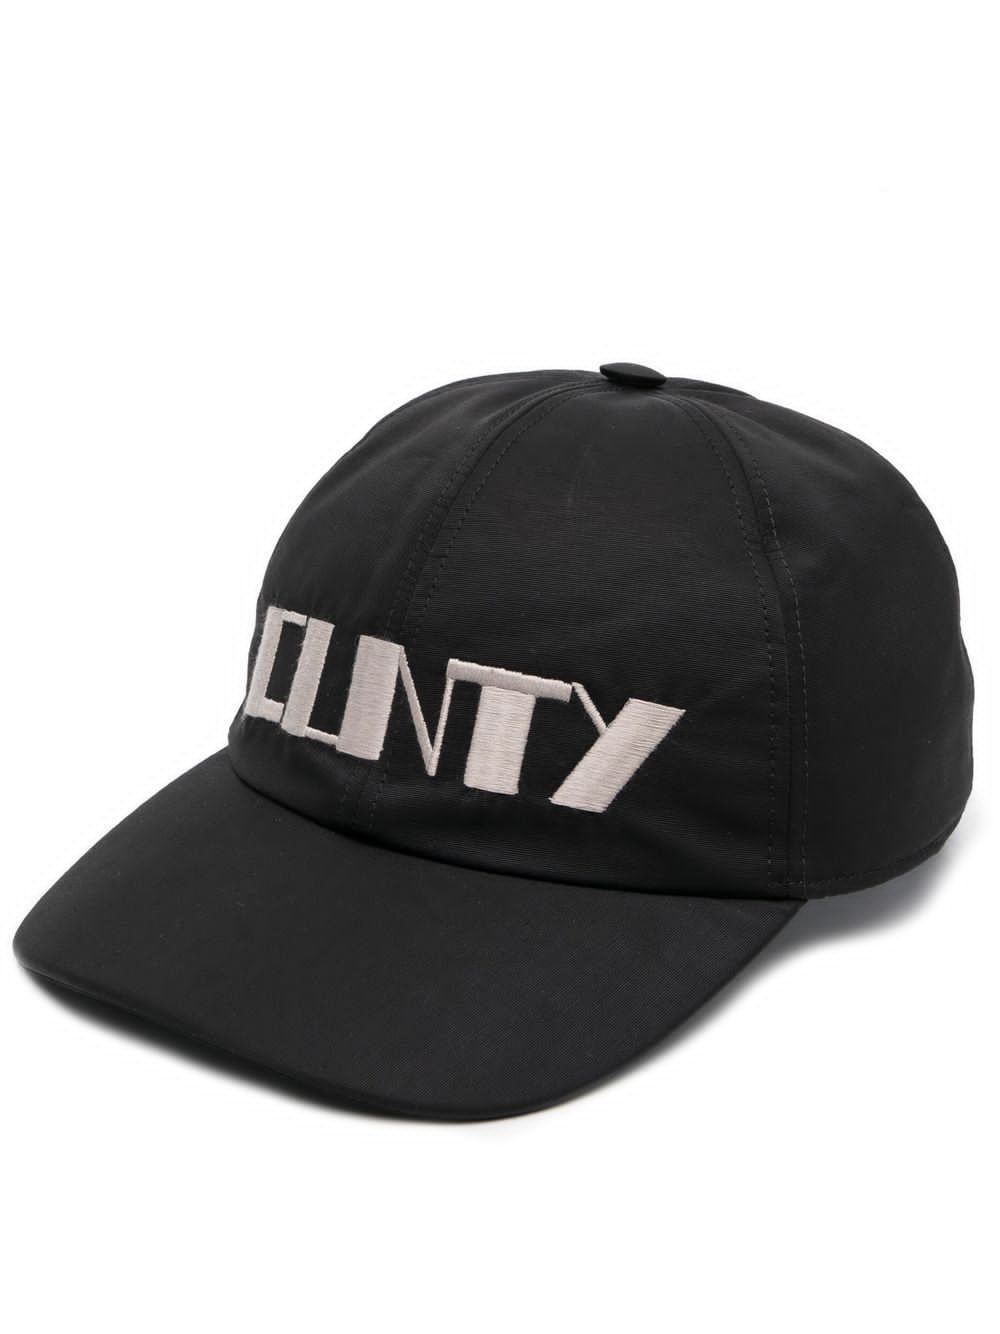 Rick Owens Cunty Embroidered Hat in Black | Grailed